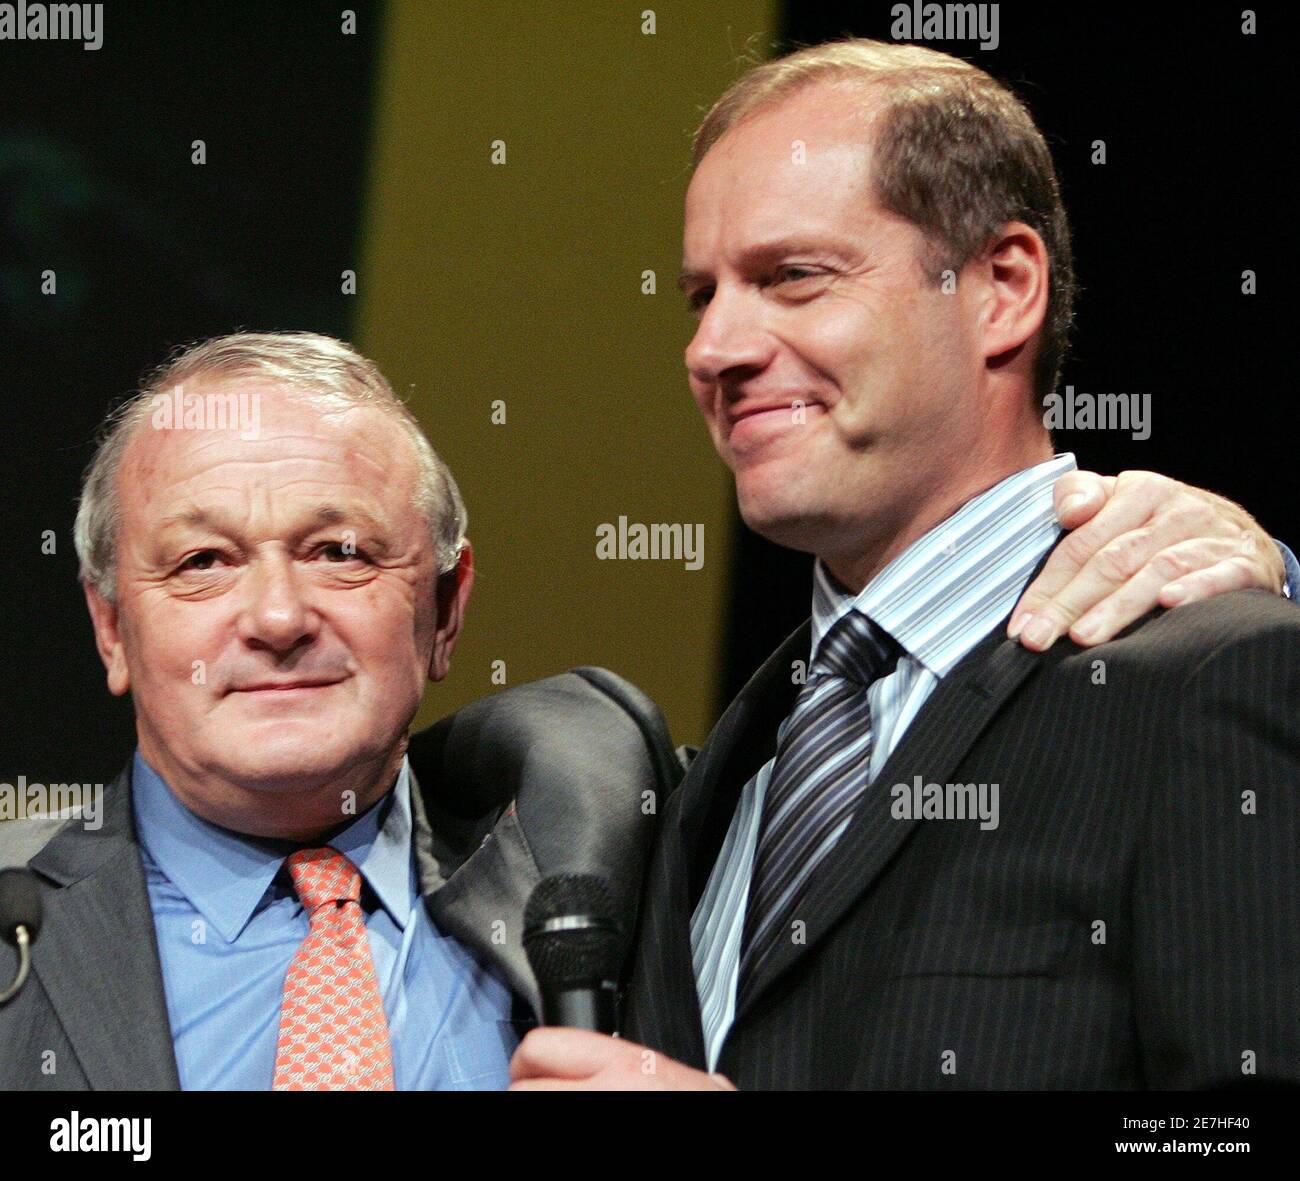 Outgoing Tour de France cycling race director Jean-Marie Leblanc (L)  introduces his successor Christian Prudhomme (R) during the presentation of  the itinerary of the 2006 race in Paris, October 27, 2005. The